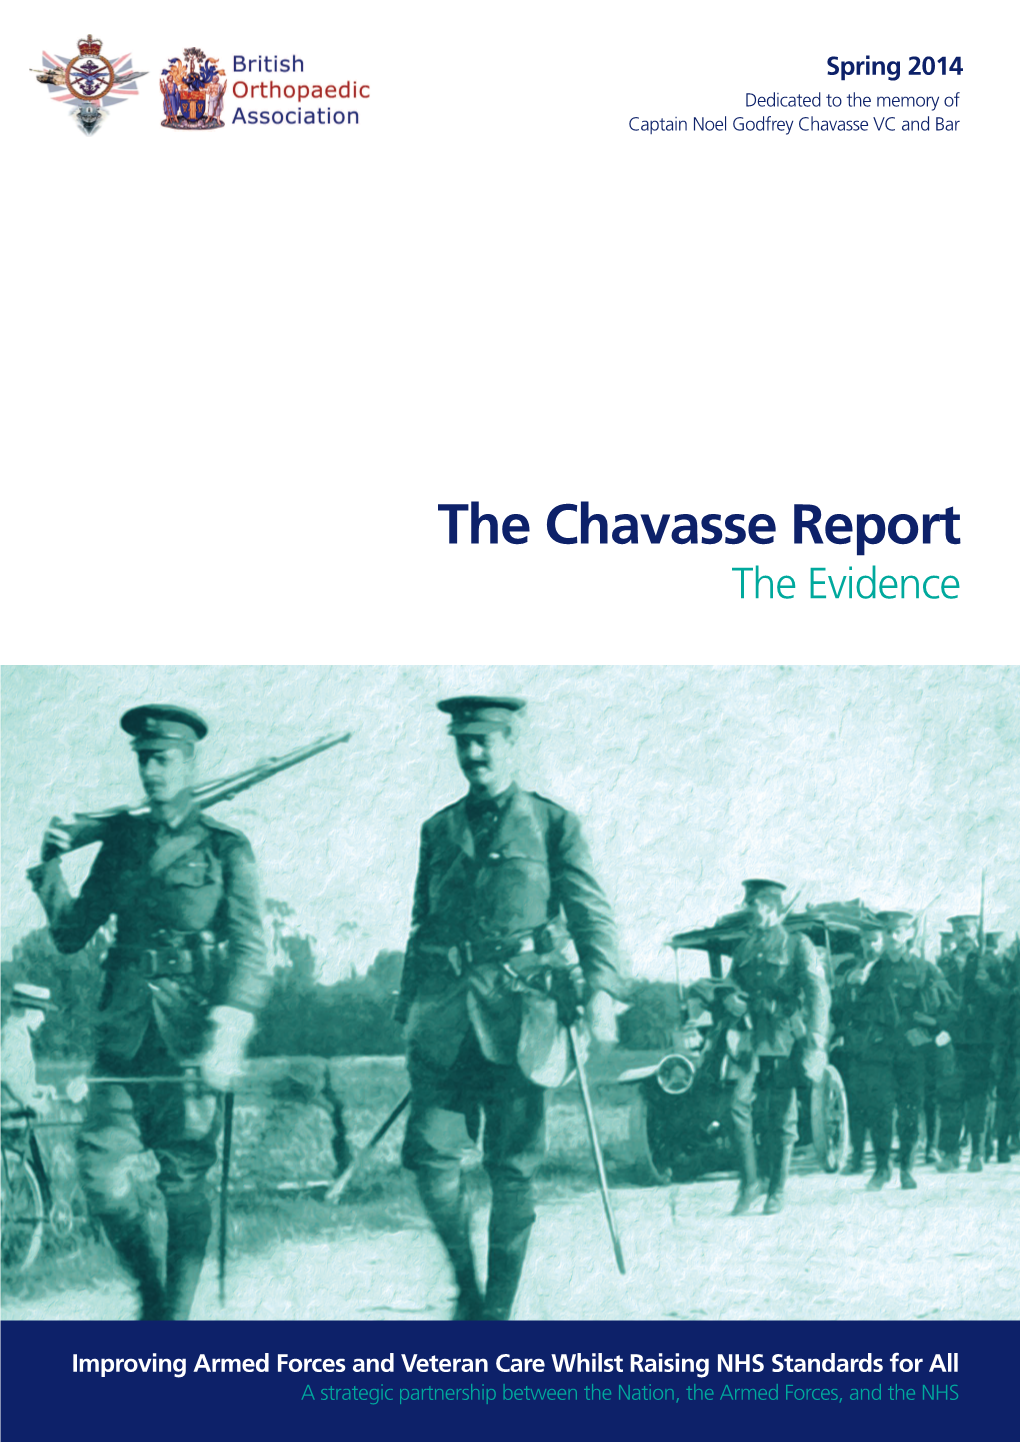 Chavasse Report, the Evidence